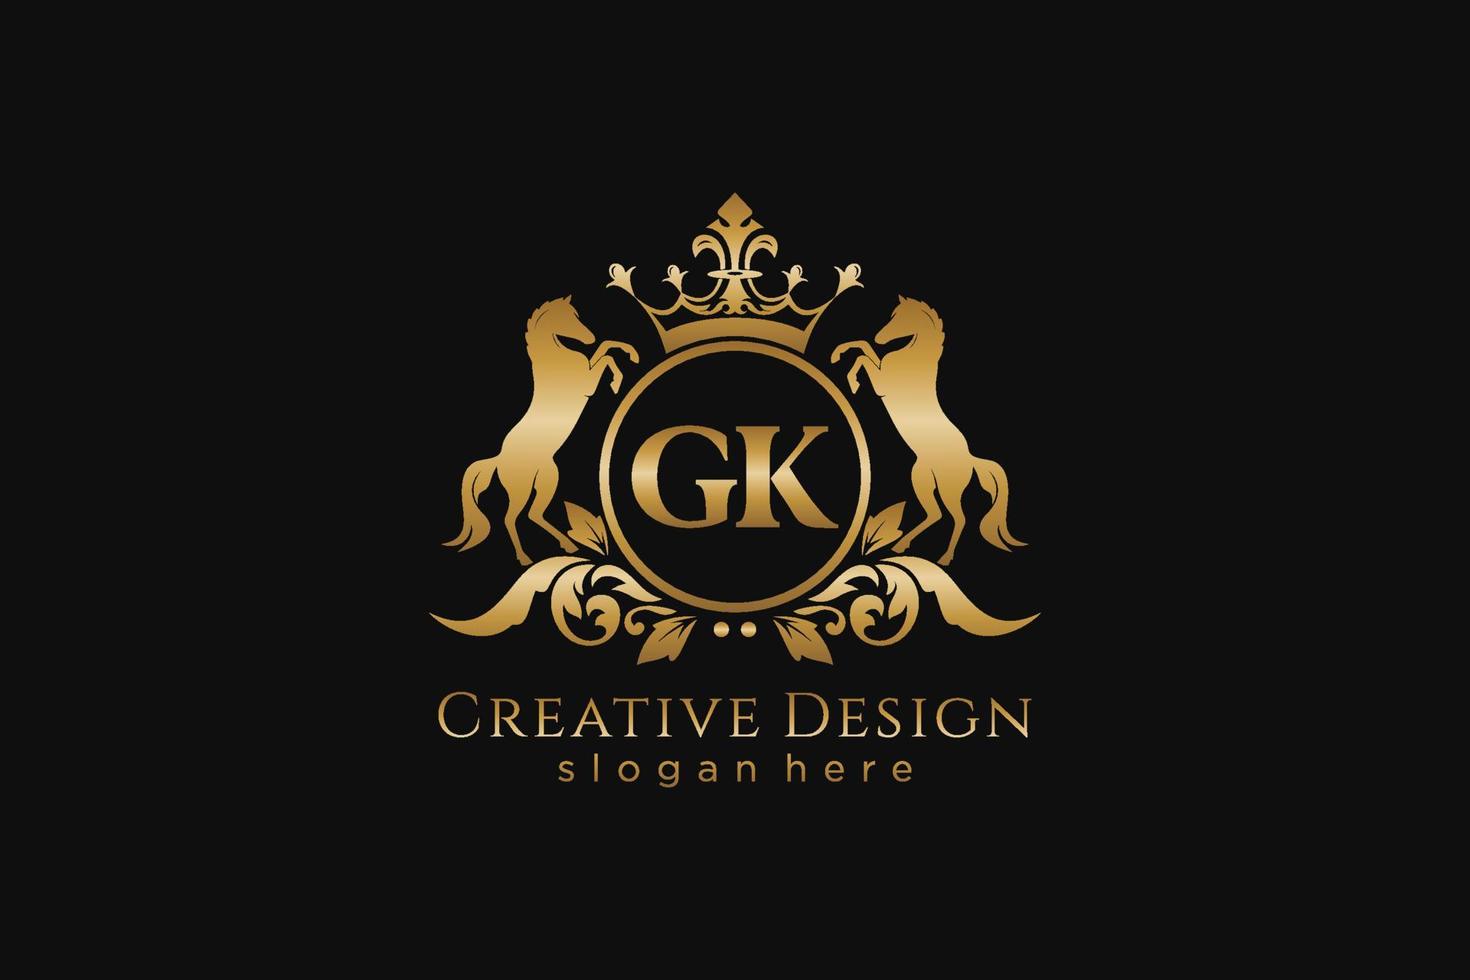 initial GK Retro golden crest with circle and two horses, badge template with scrolls and royal crown - perfect for luxurious branding projects vector